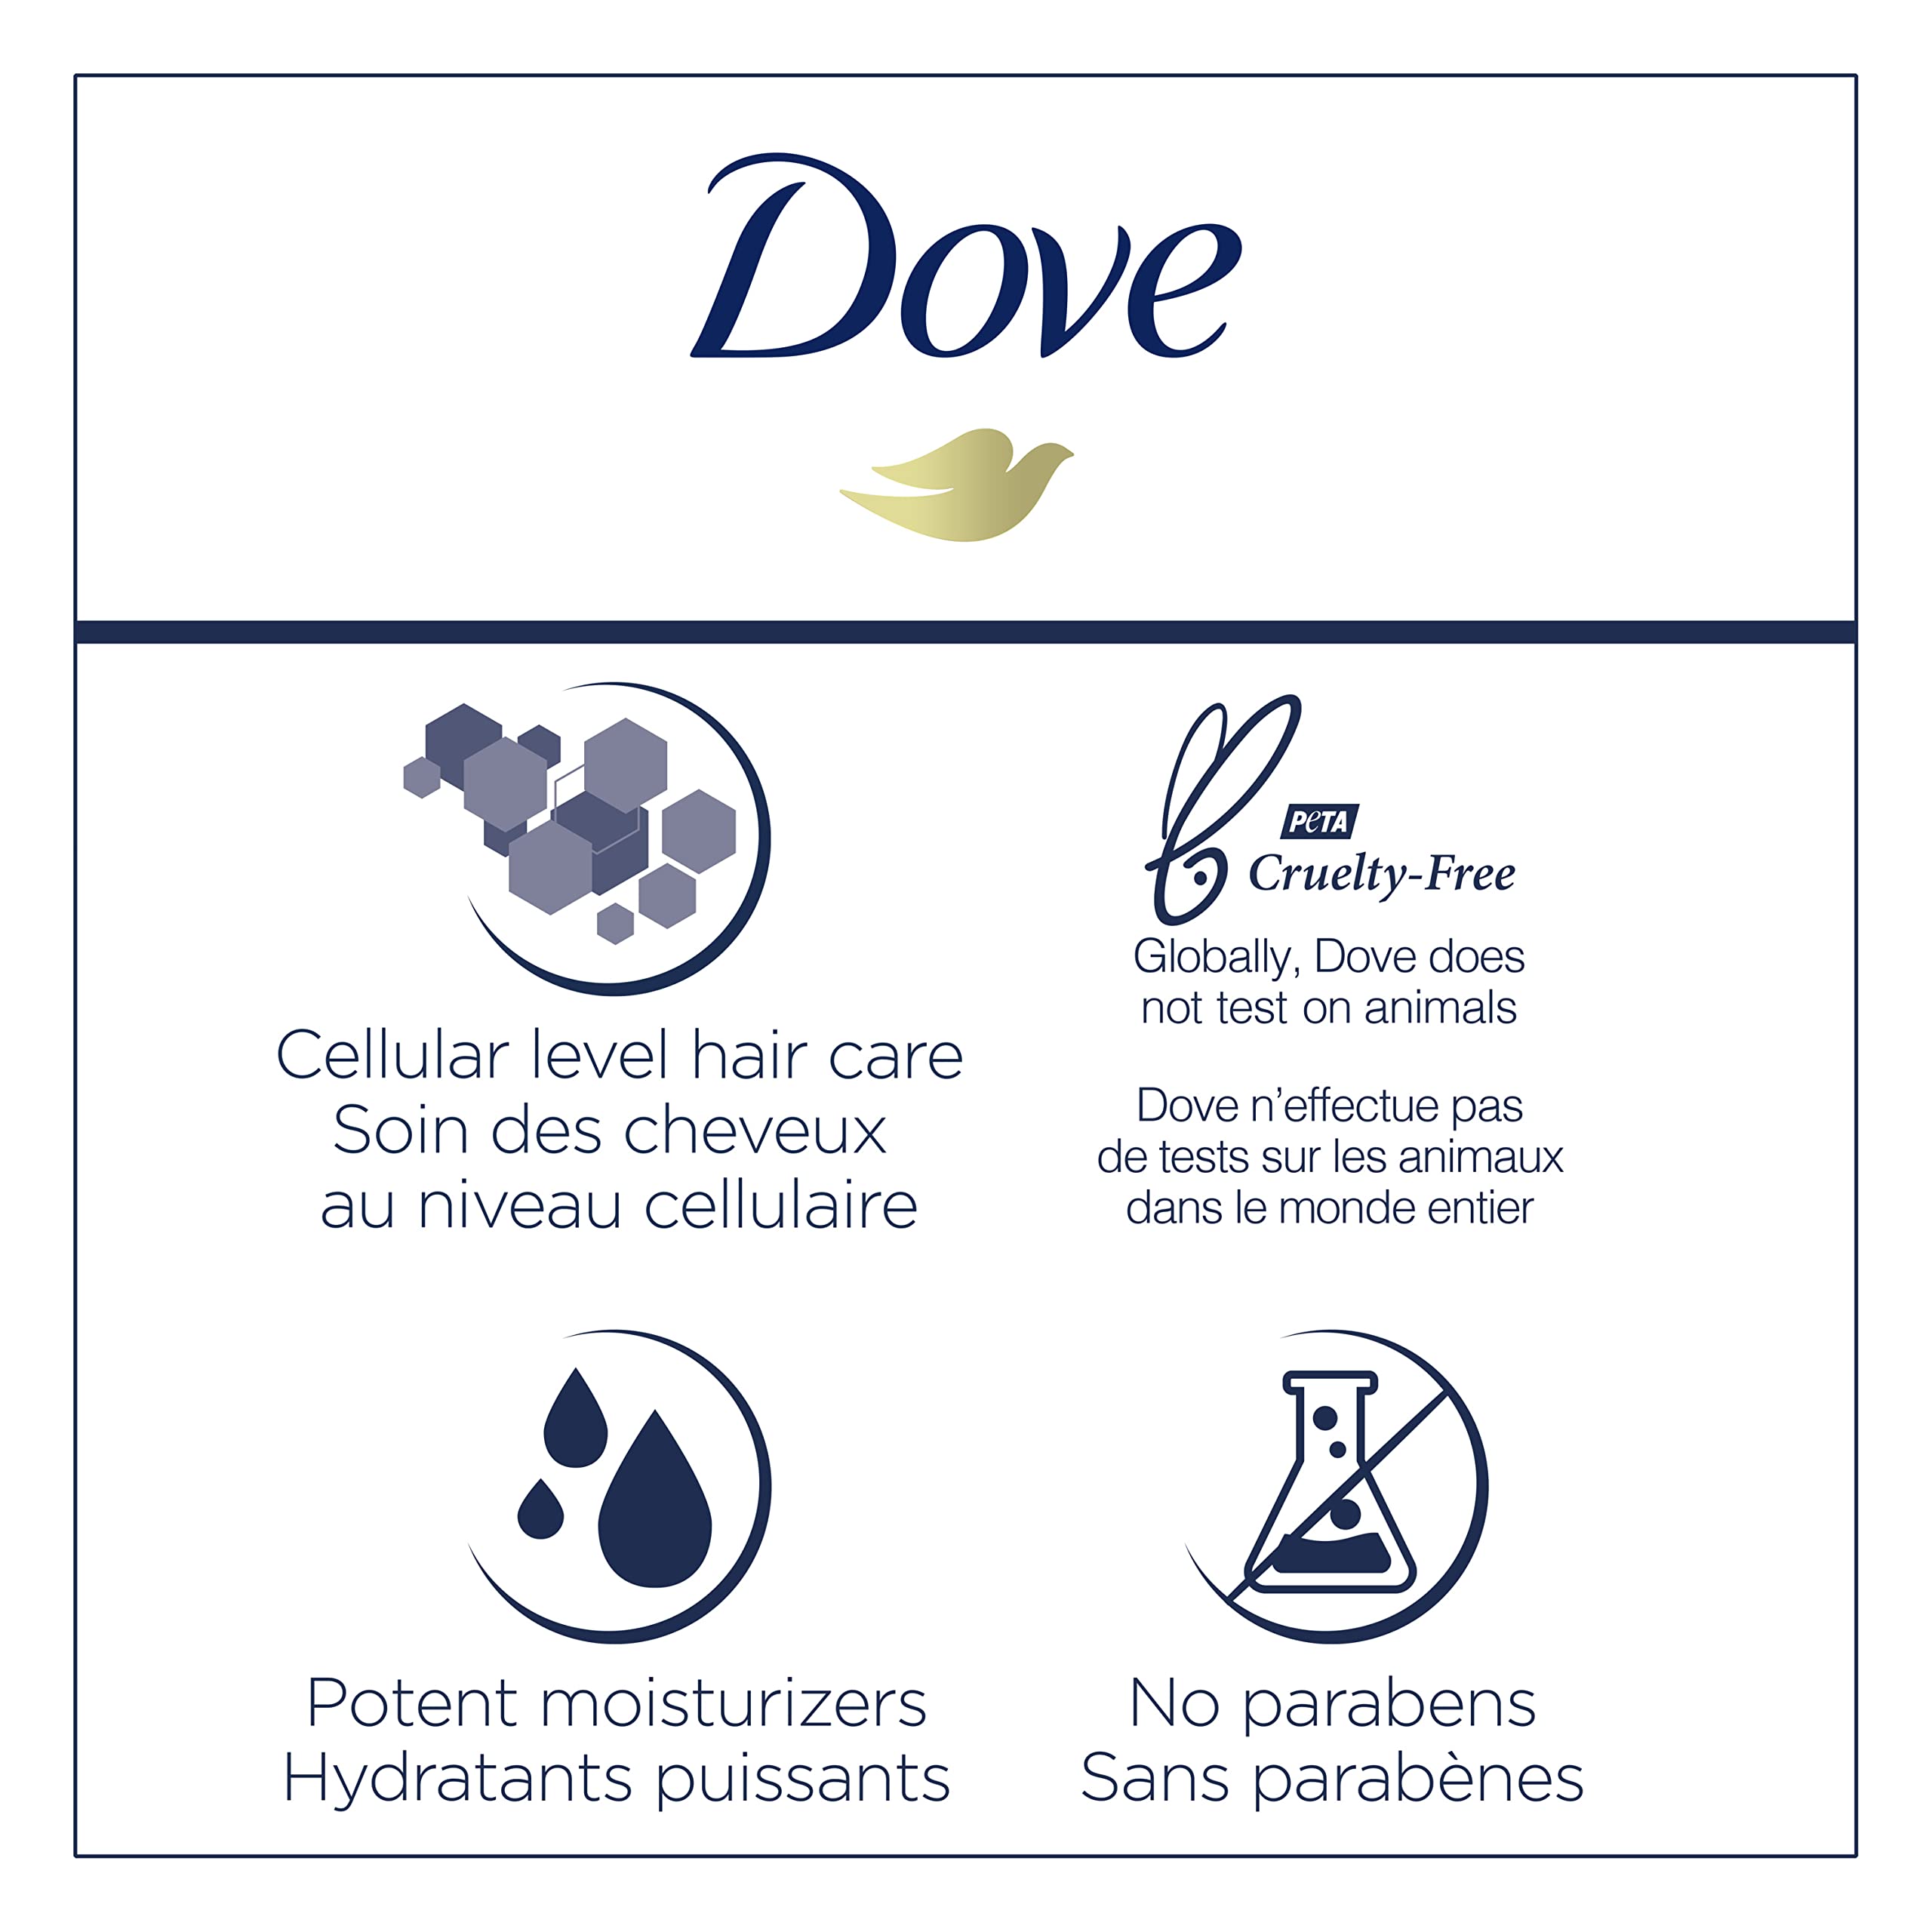 Dove Hair Therapy Serum + Conditioner Hair Care For Split Ends and Damaged Hair Rescue and Protect Visibly Repairs Hair in 1 Minute 33.8 fl oz